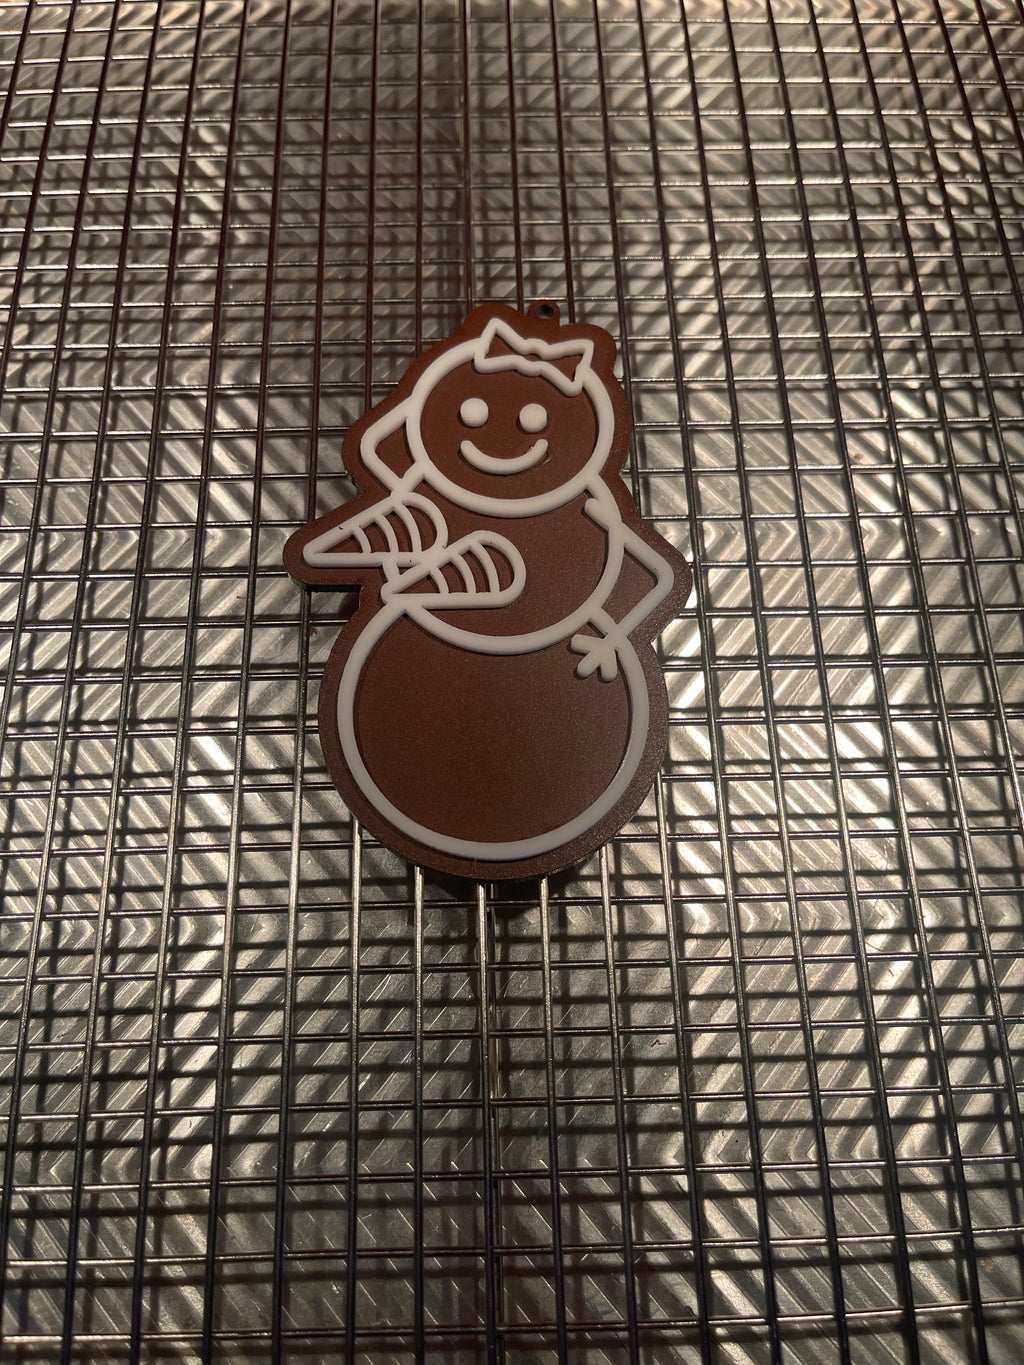 Naughty Gingerbread Ornament